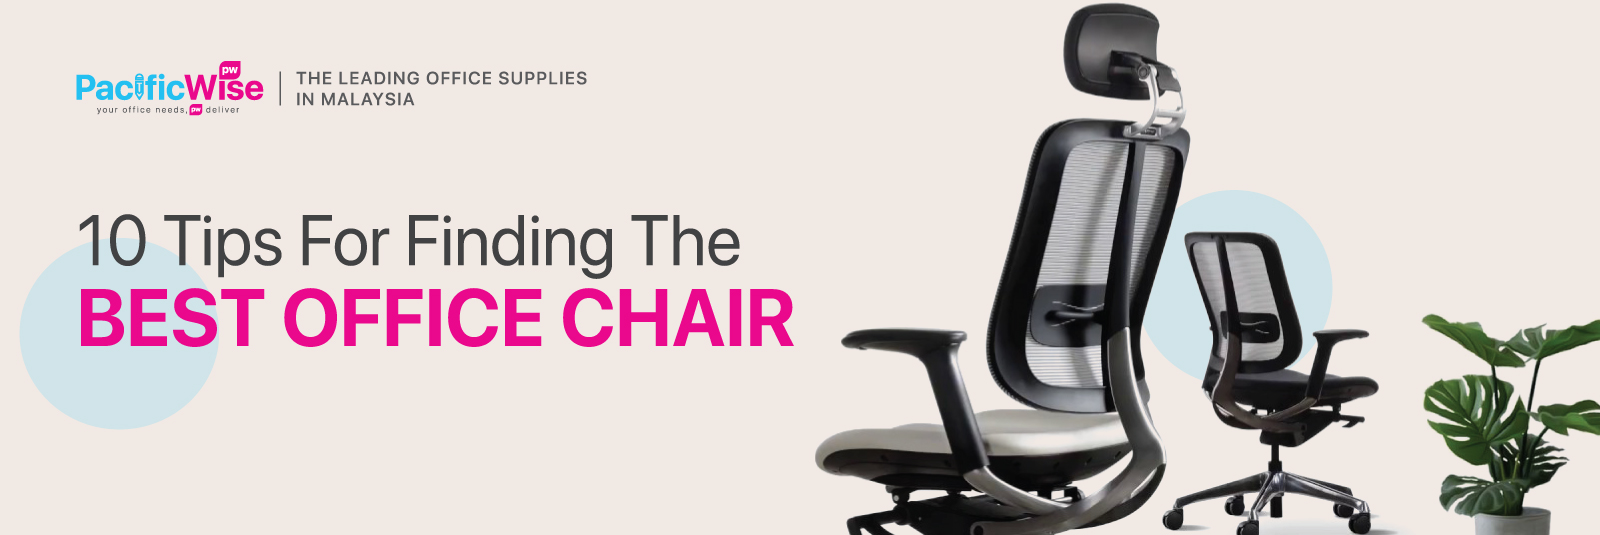 10 tips for finding the best office chair